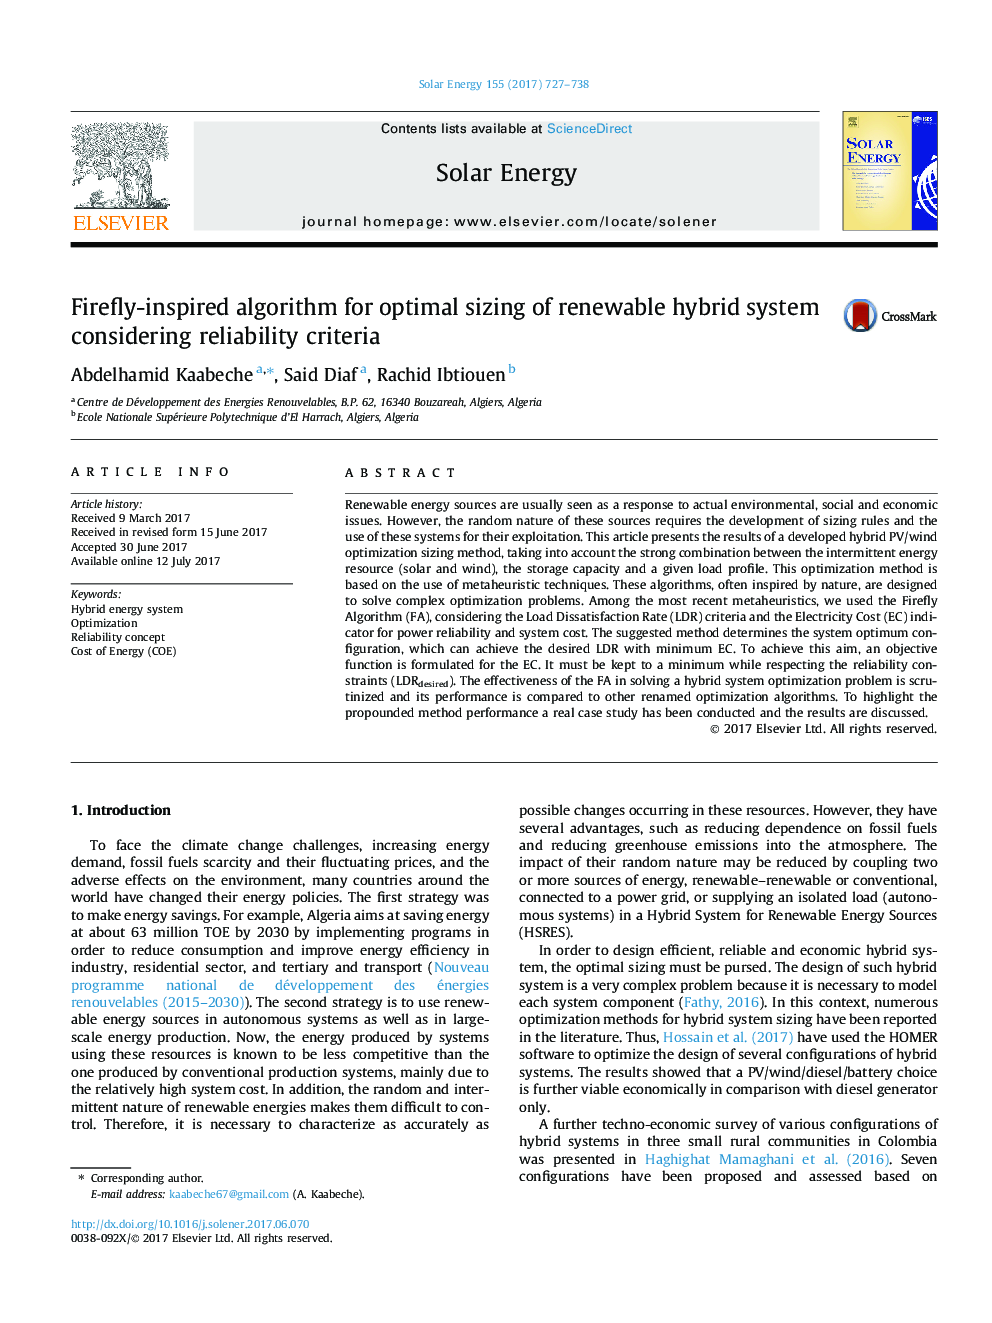 Firefly-inspired algorithm for optimal sizing of renewable hybrid system considering reliability criteria